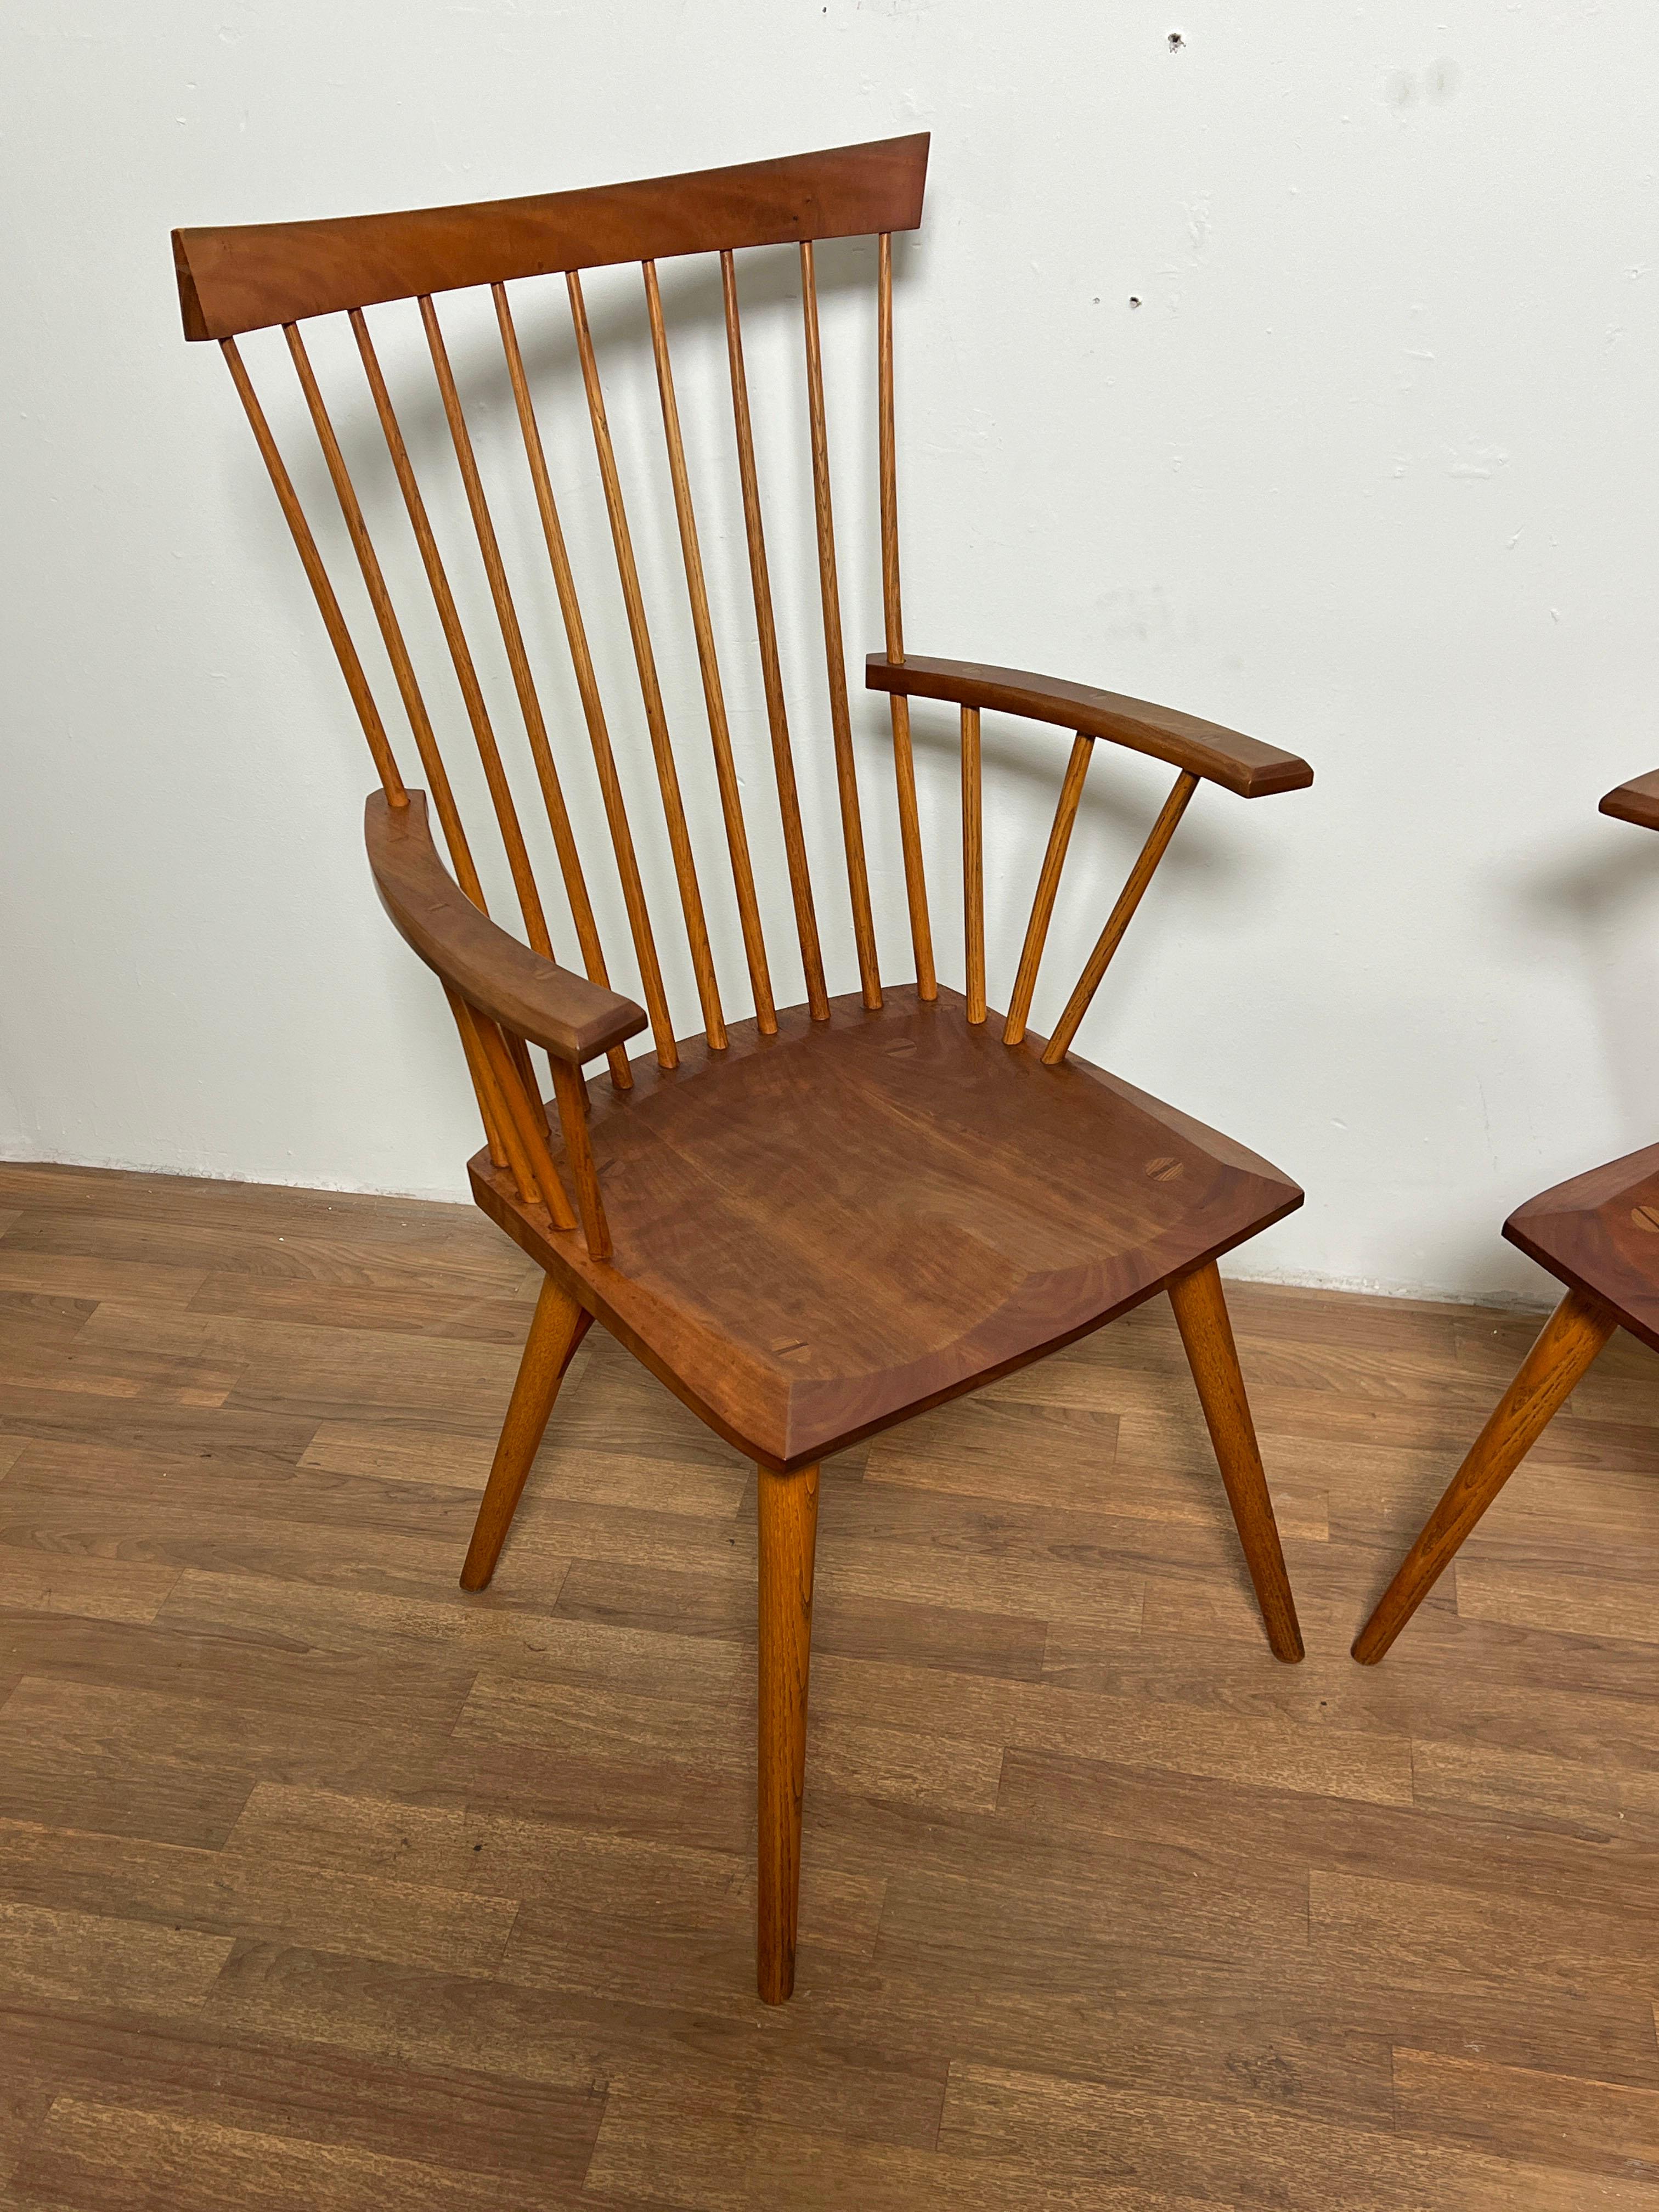 A pair of handcrafted “Eastward” armchairs by Thomas Moser in cherry, dated 1991.